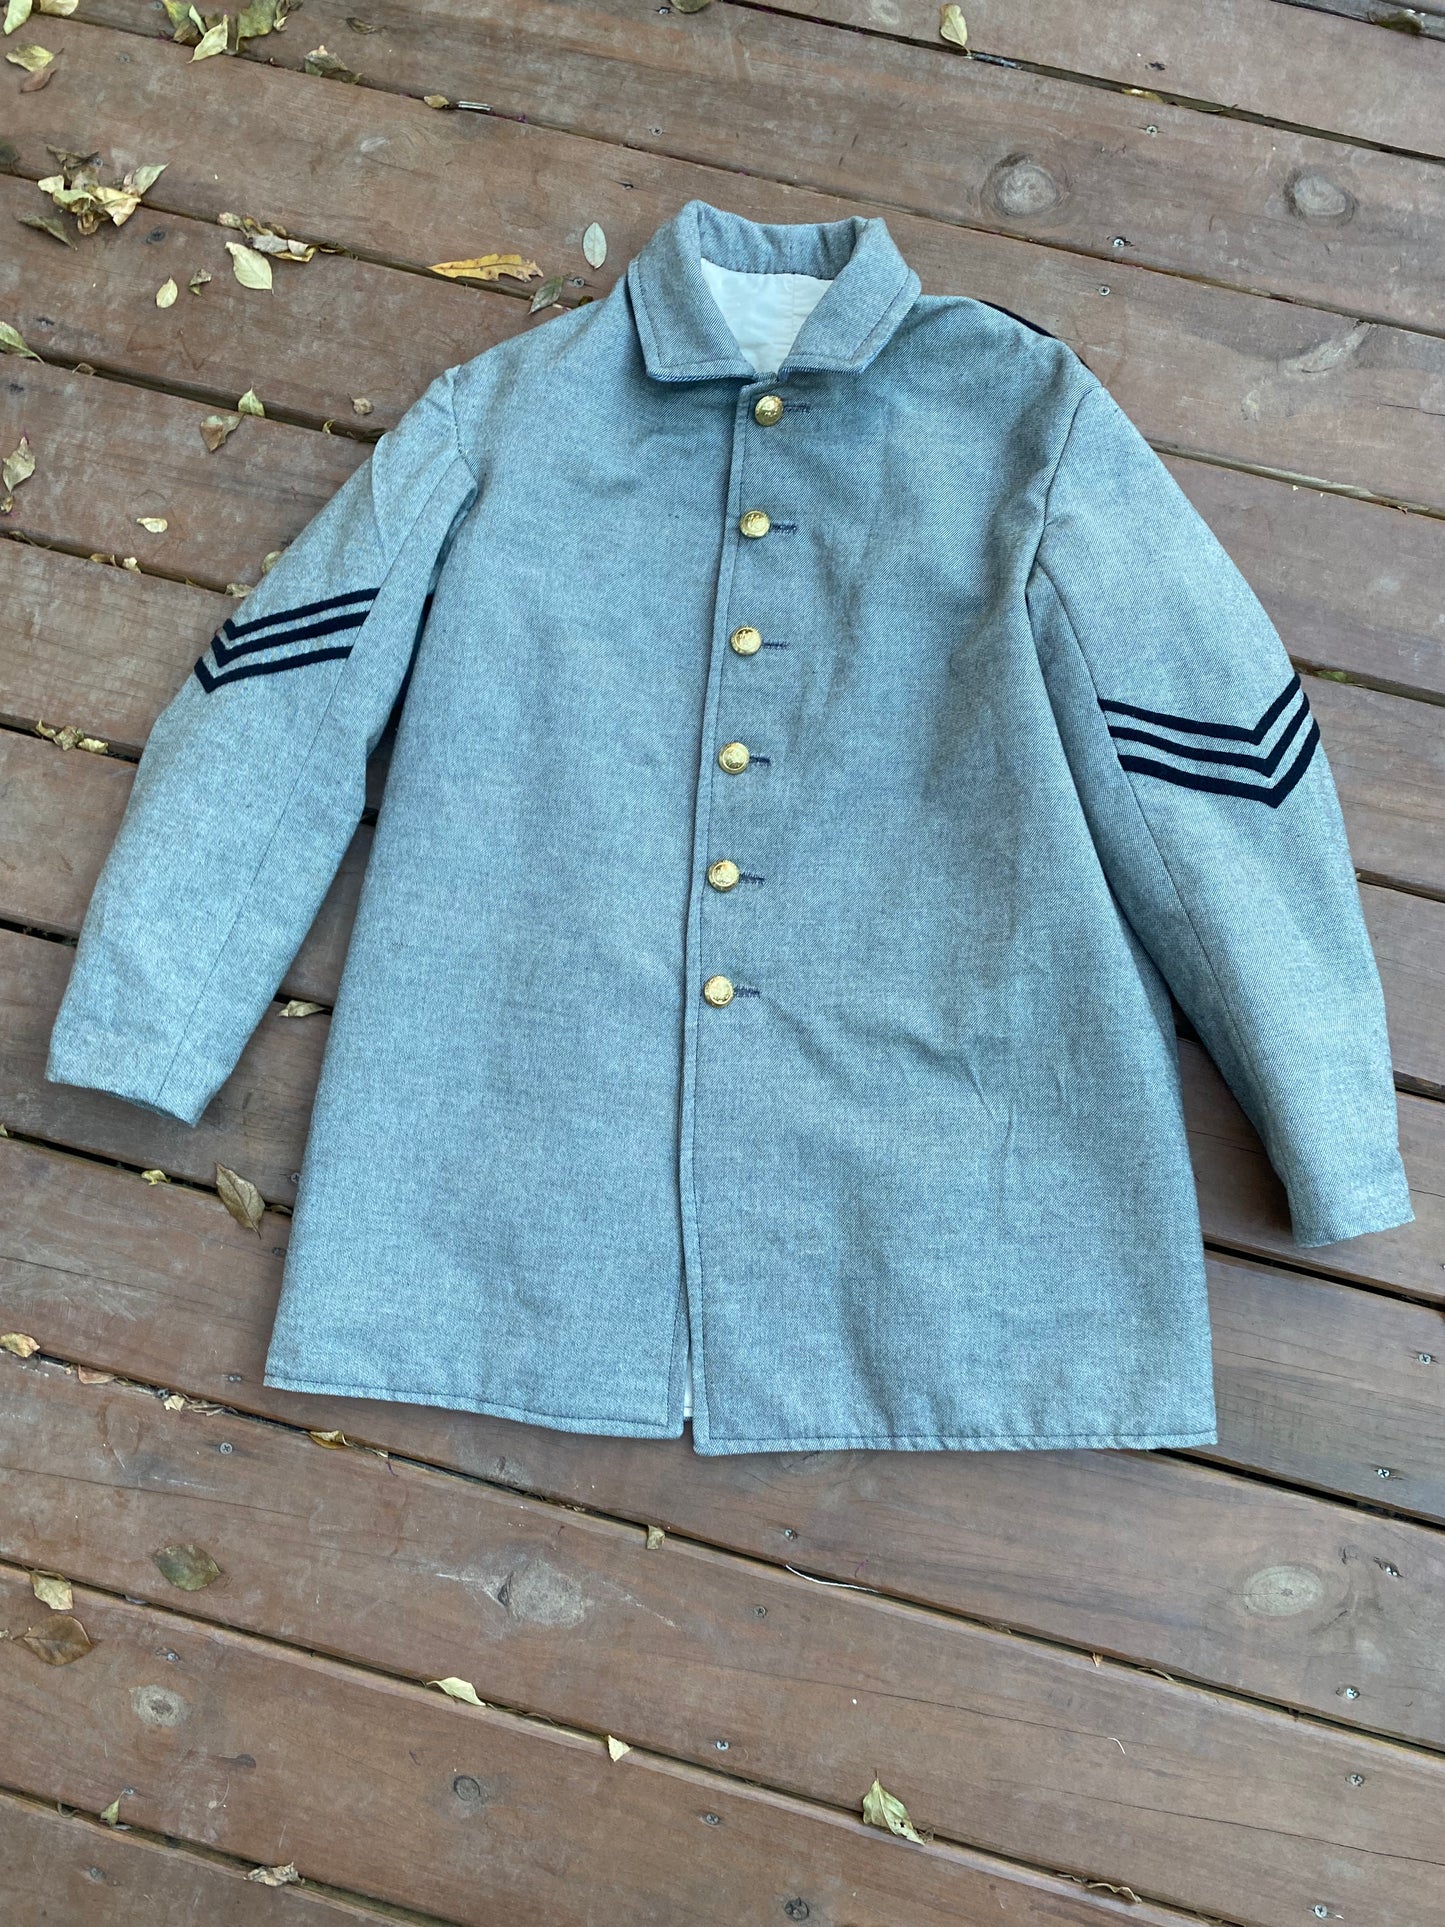 Southern NCO Chevrons (With Jacket Purchase Only)